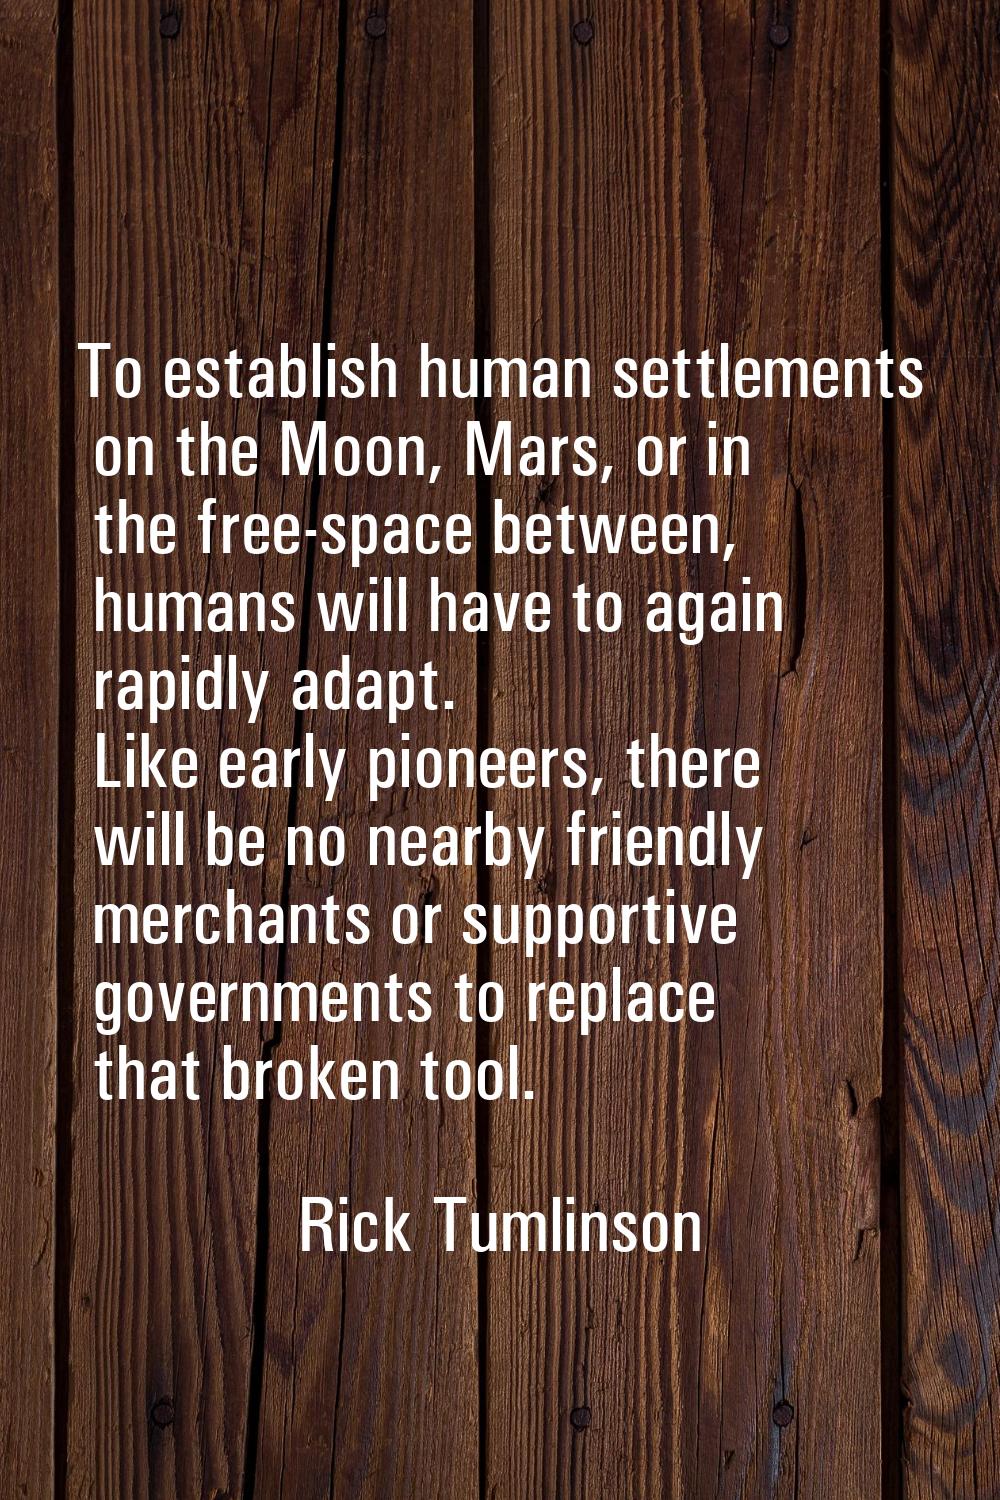 To establish human settlements on the Moon, Mars, or in the free-space between, humans will have to